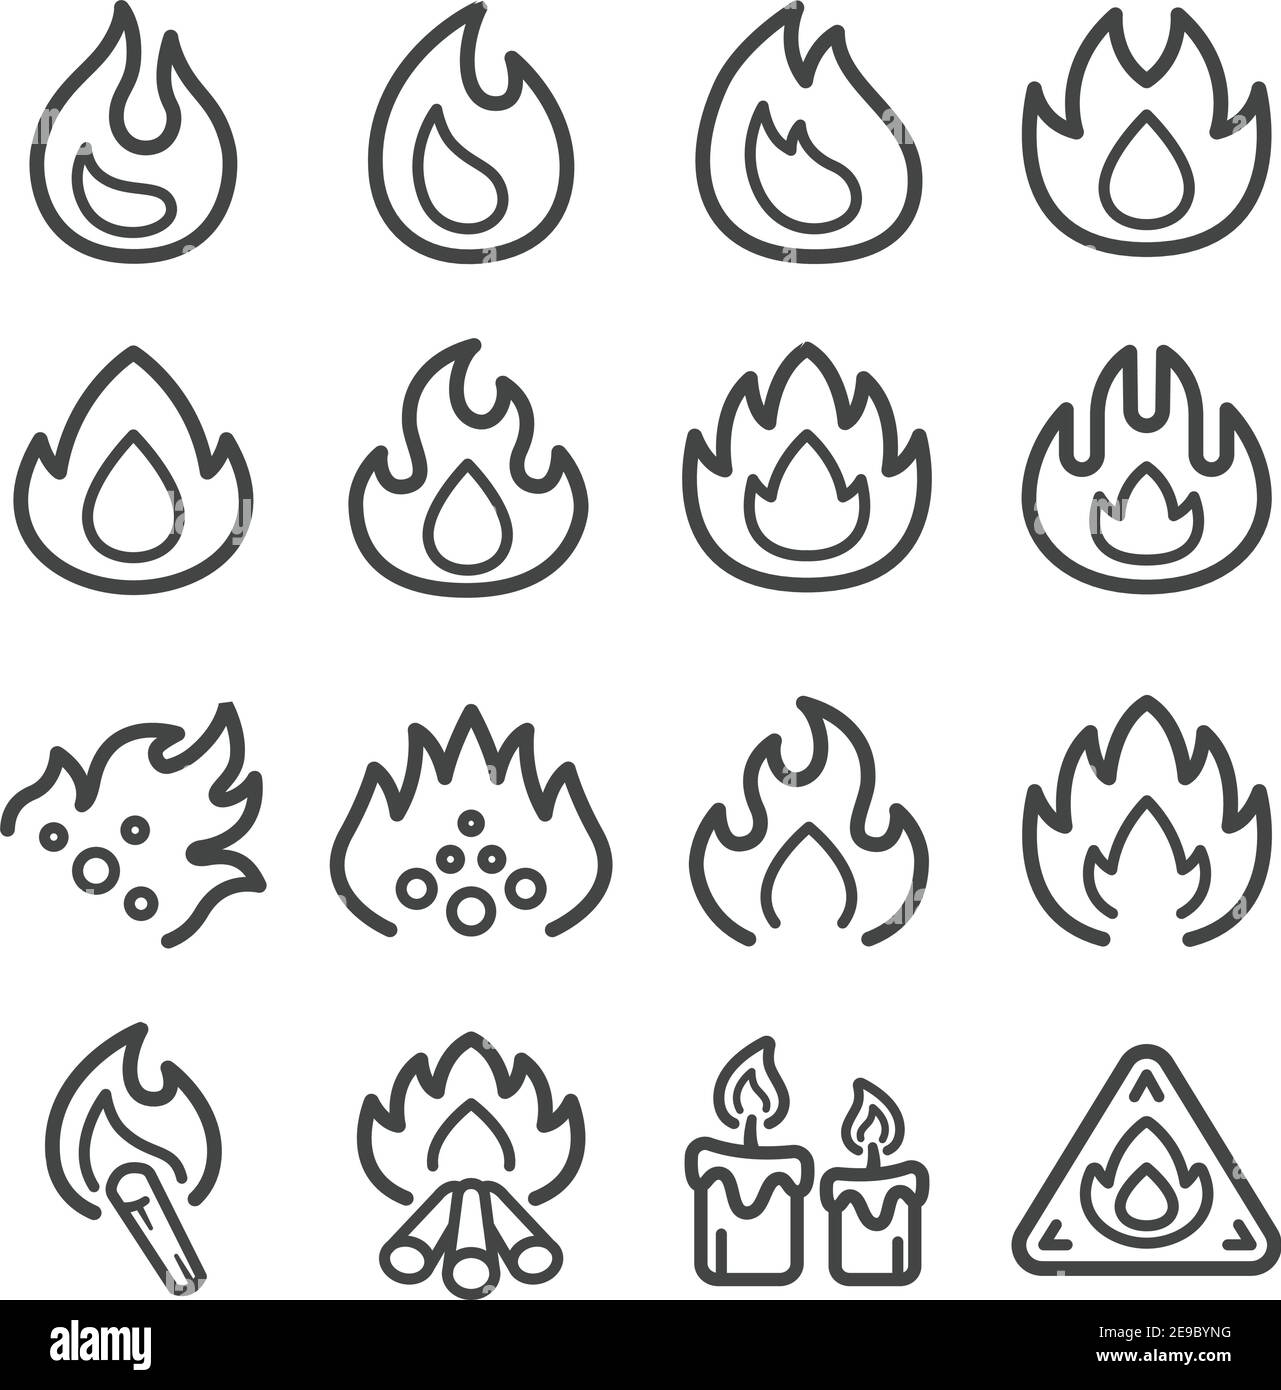 fire and flame thin line icon set,vector and illustration Stock Vector